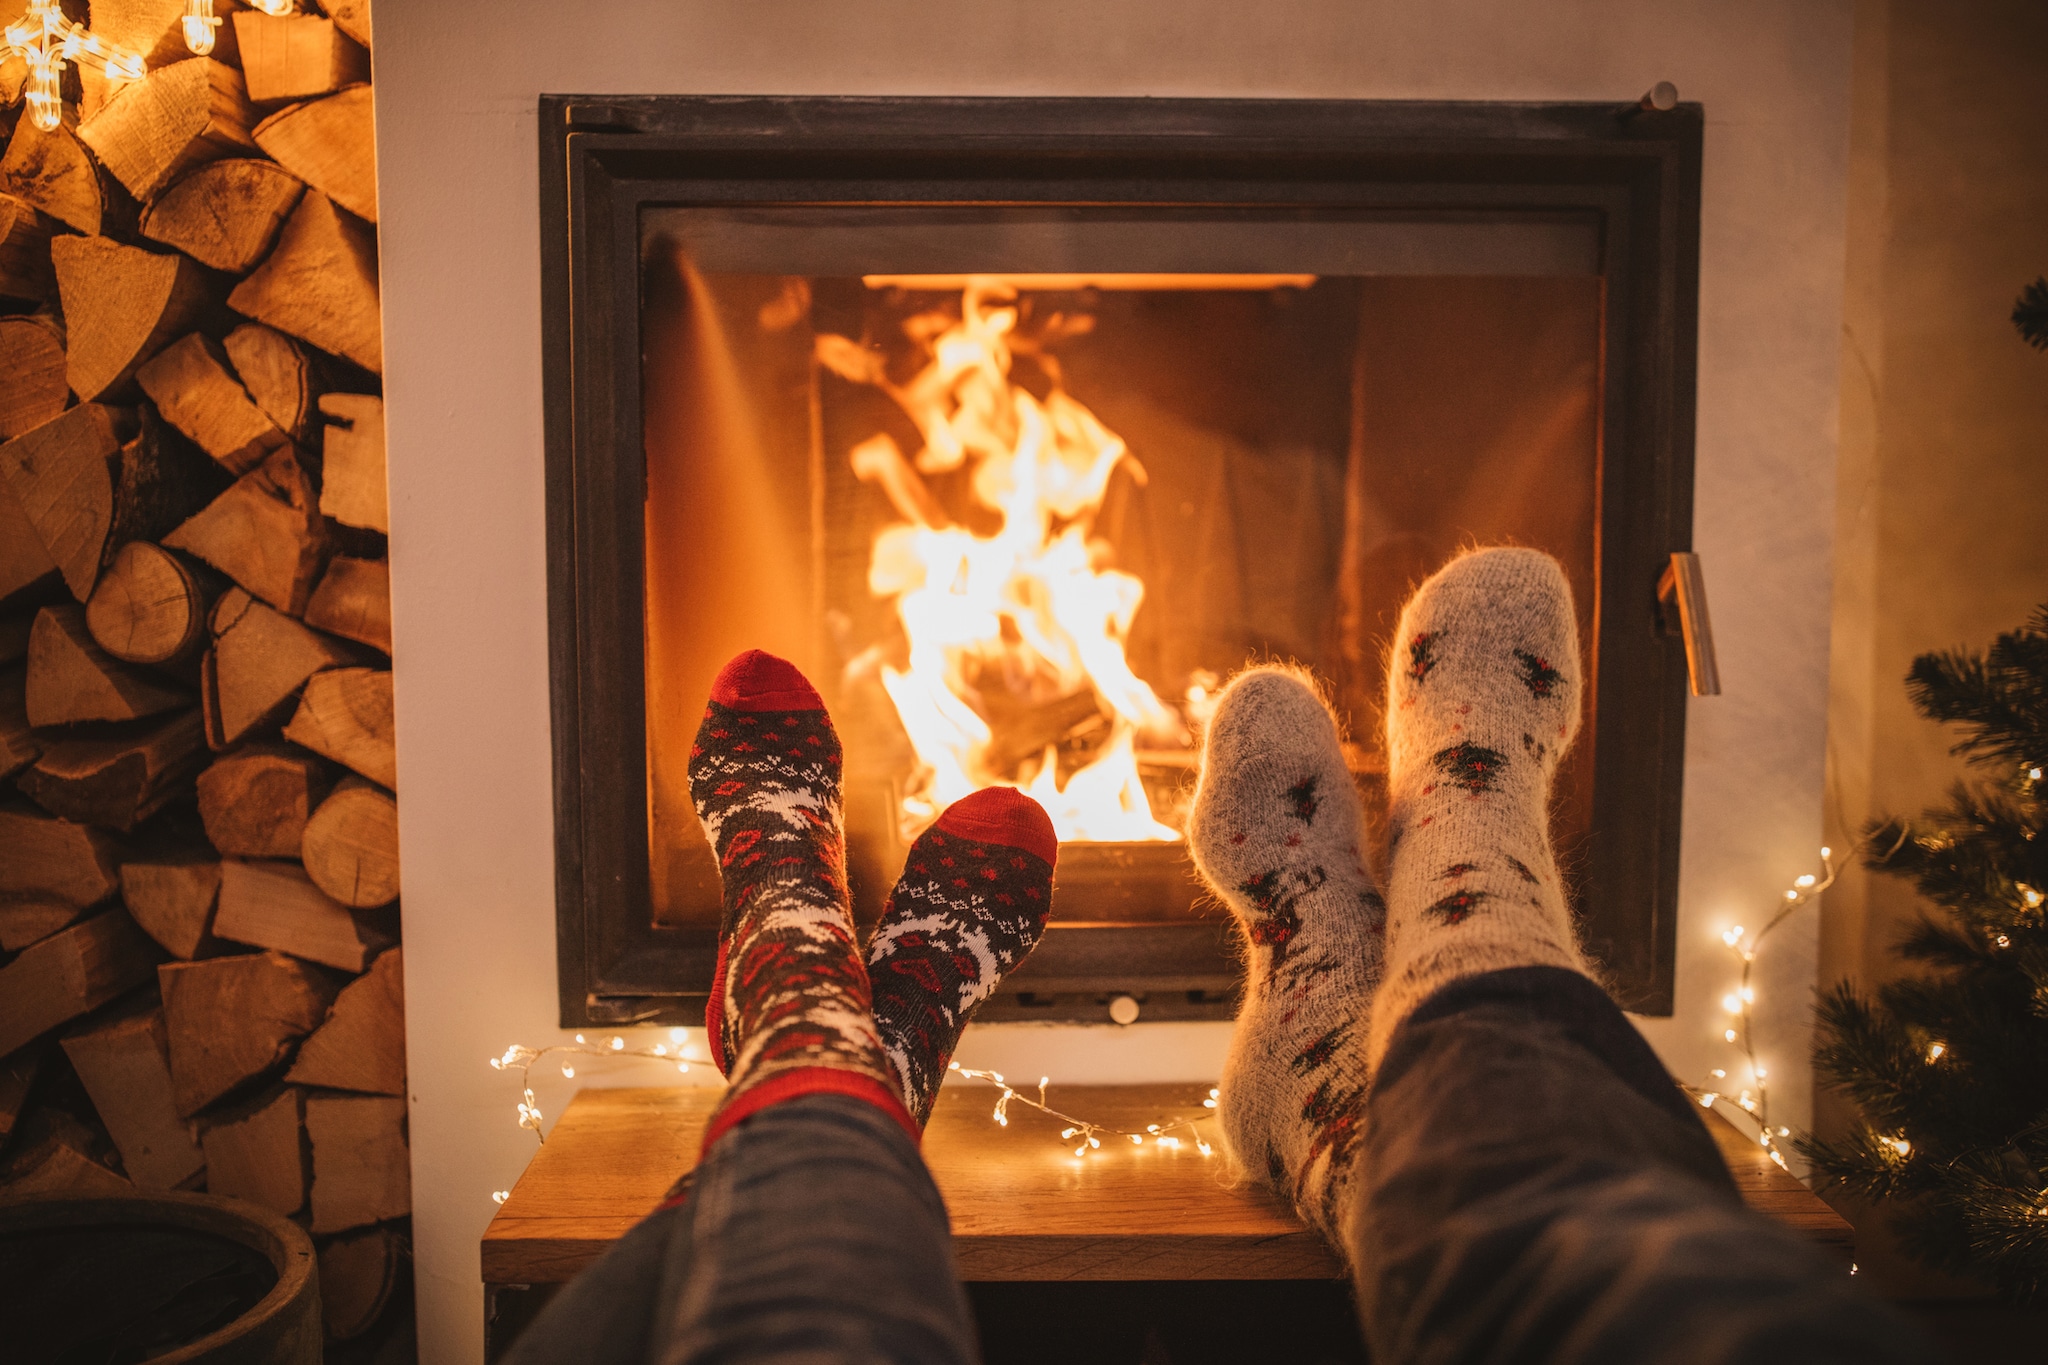 Two sets of legs with ankles crossed, wearing blue jeans and holiday print socks are stretched out on a coffee table in front of a lit fireplace.